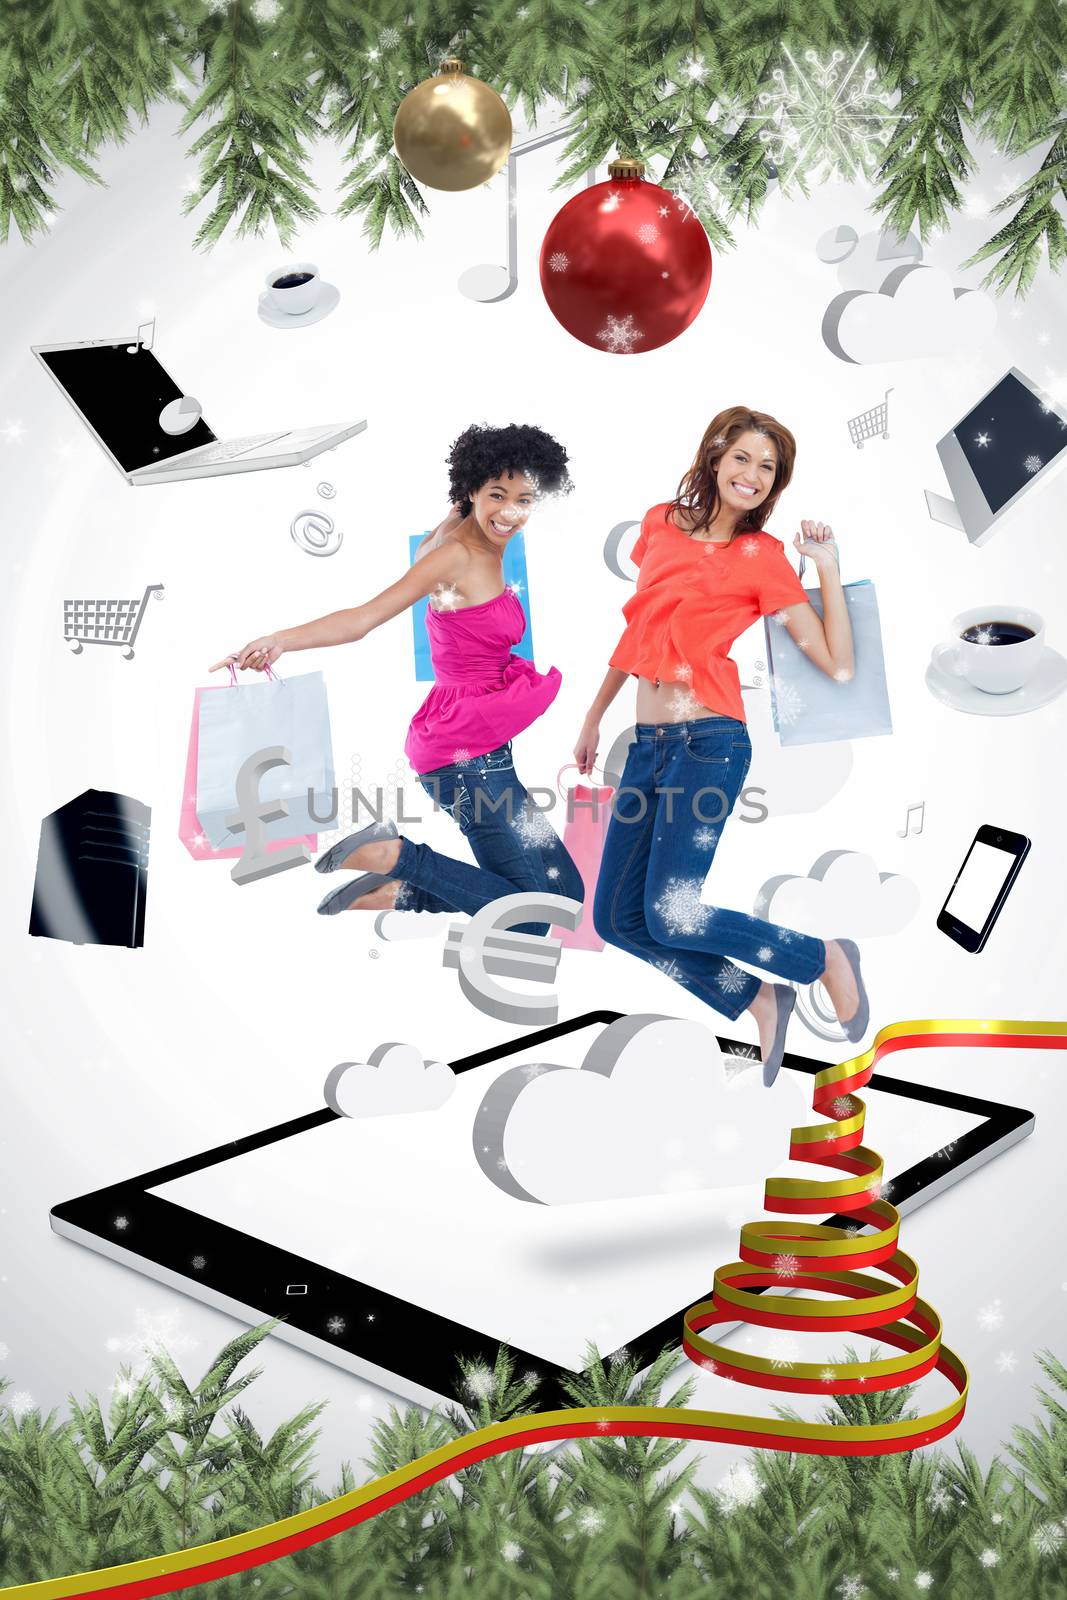 Two smiling women jumping on a tablet pc  against snow falling